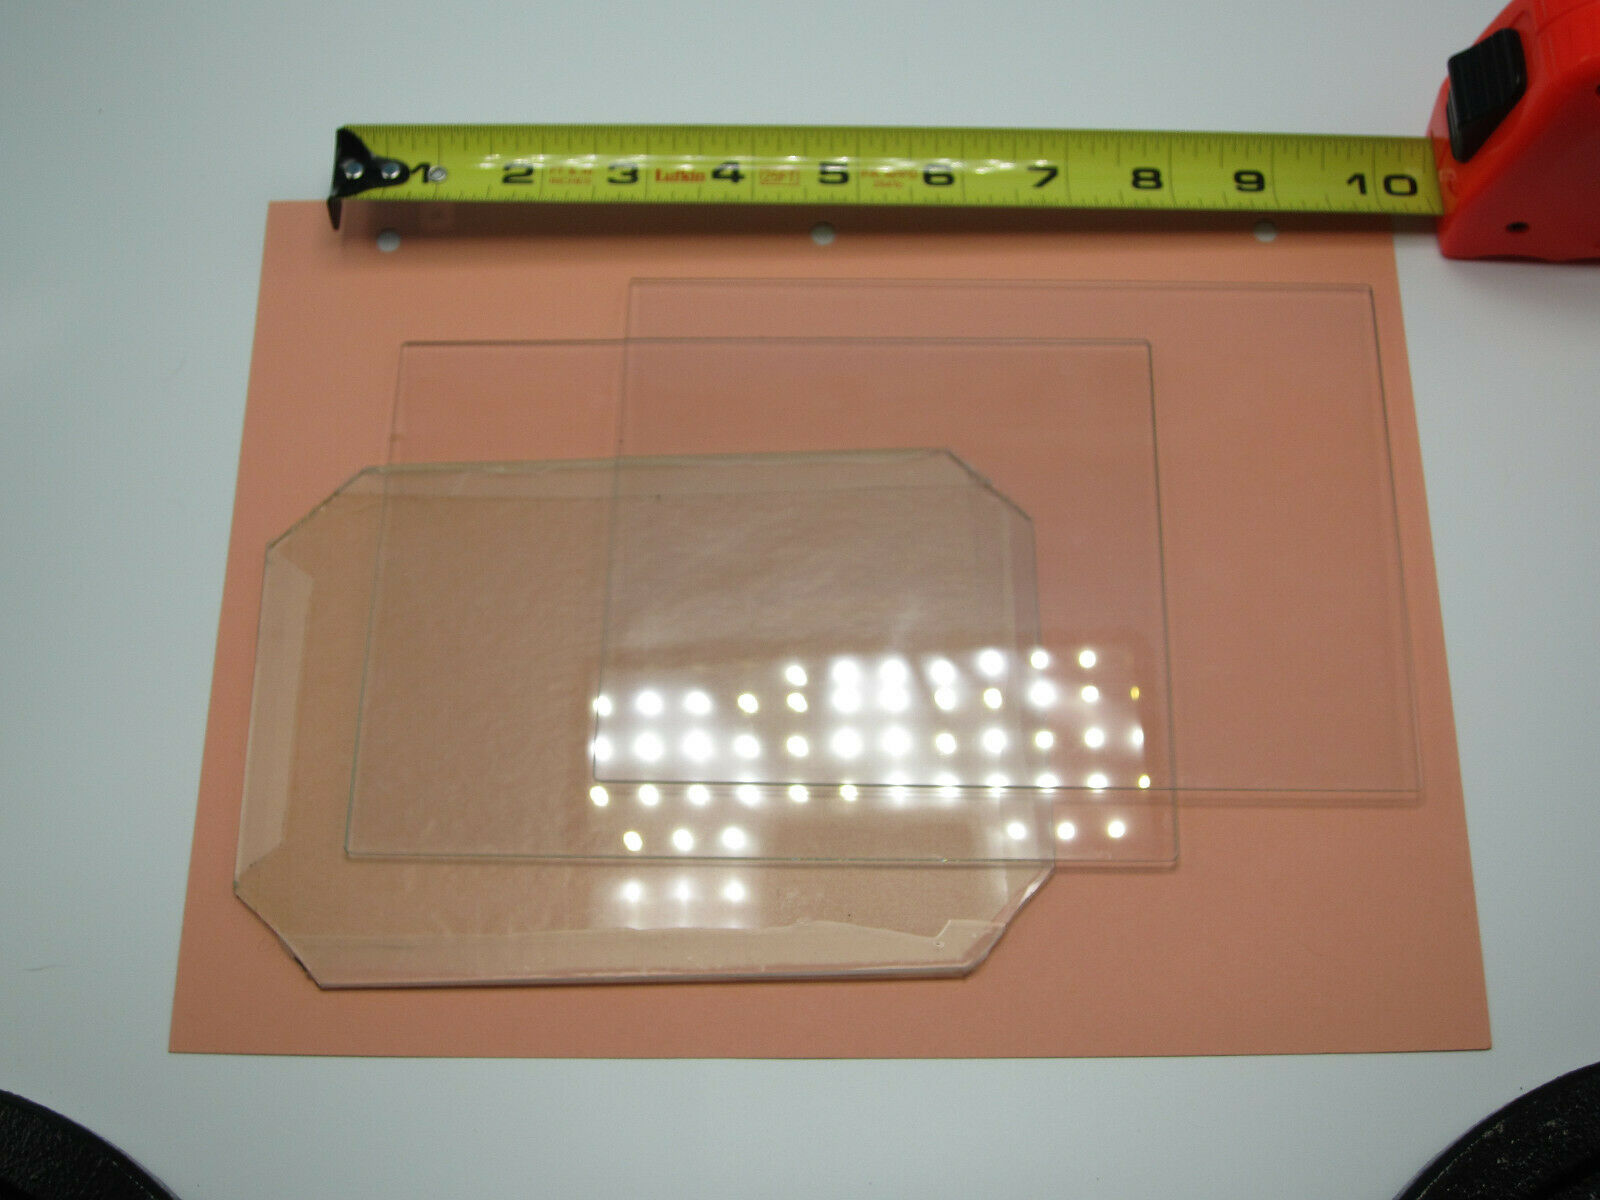 Lot Of 3 - 5x7 Glass For Contact Printing, Negative Carriers, Etc.